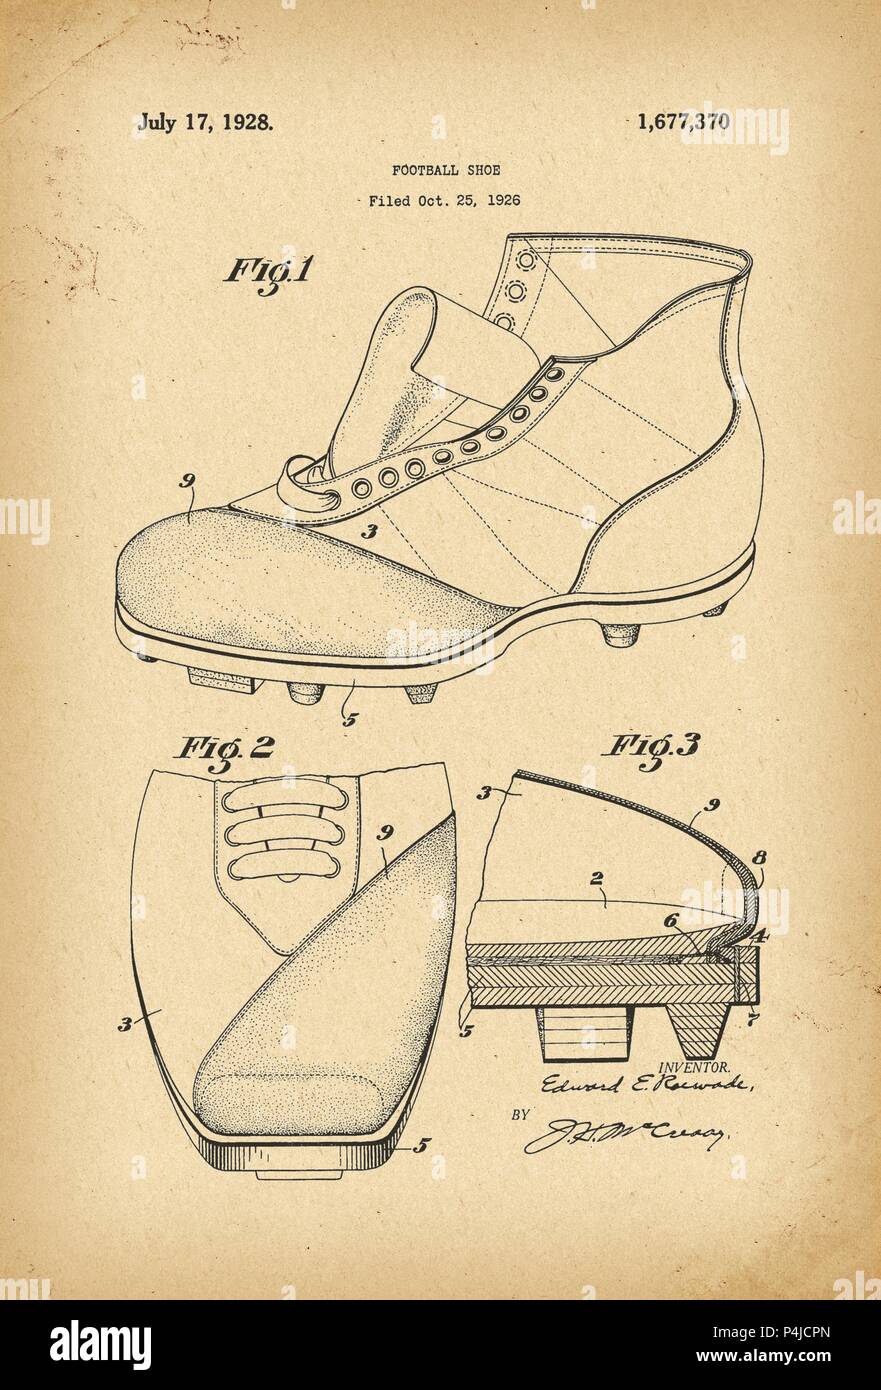 1926 Football shoe Patent history invention Stock Photo